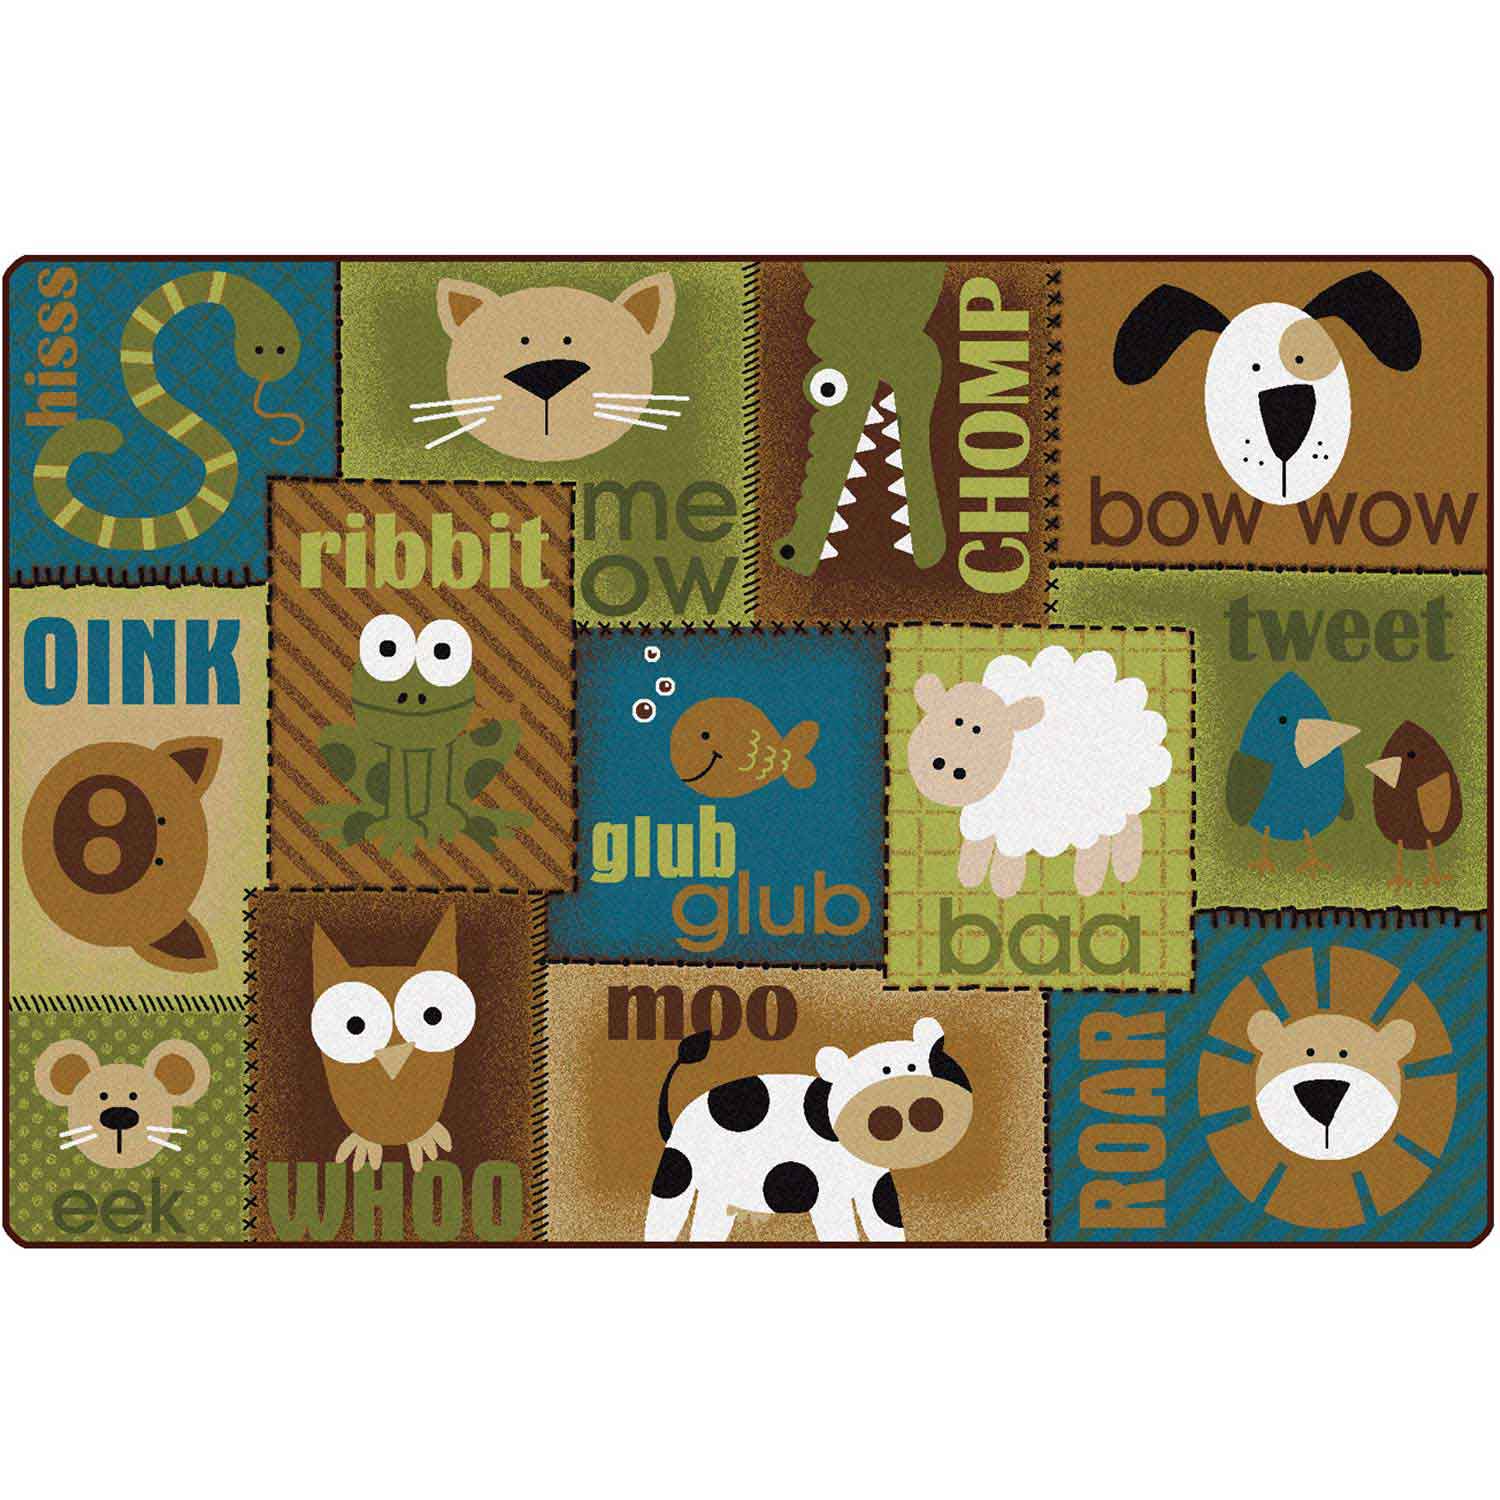 KIDSoft™ Animal Sounds Toddler Classroom Rug, Nature's Colors